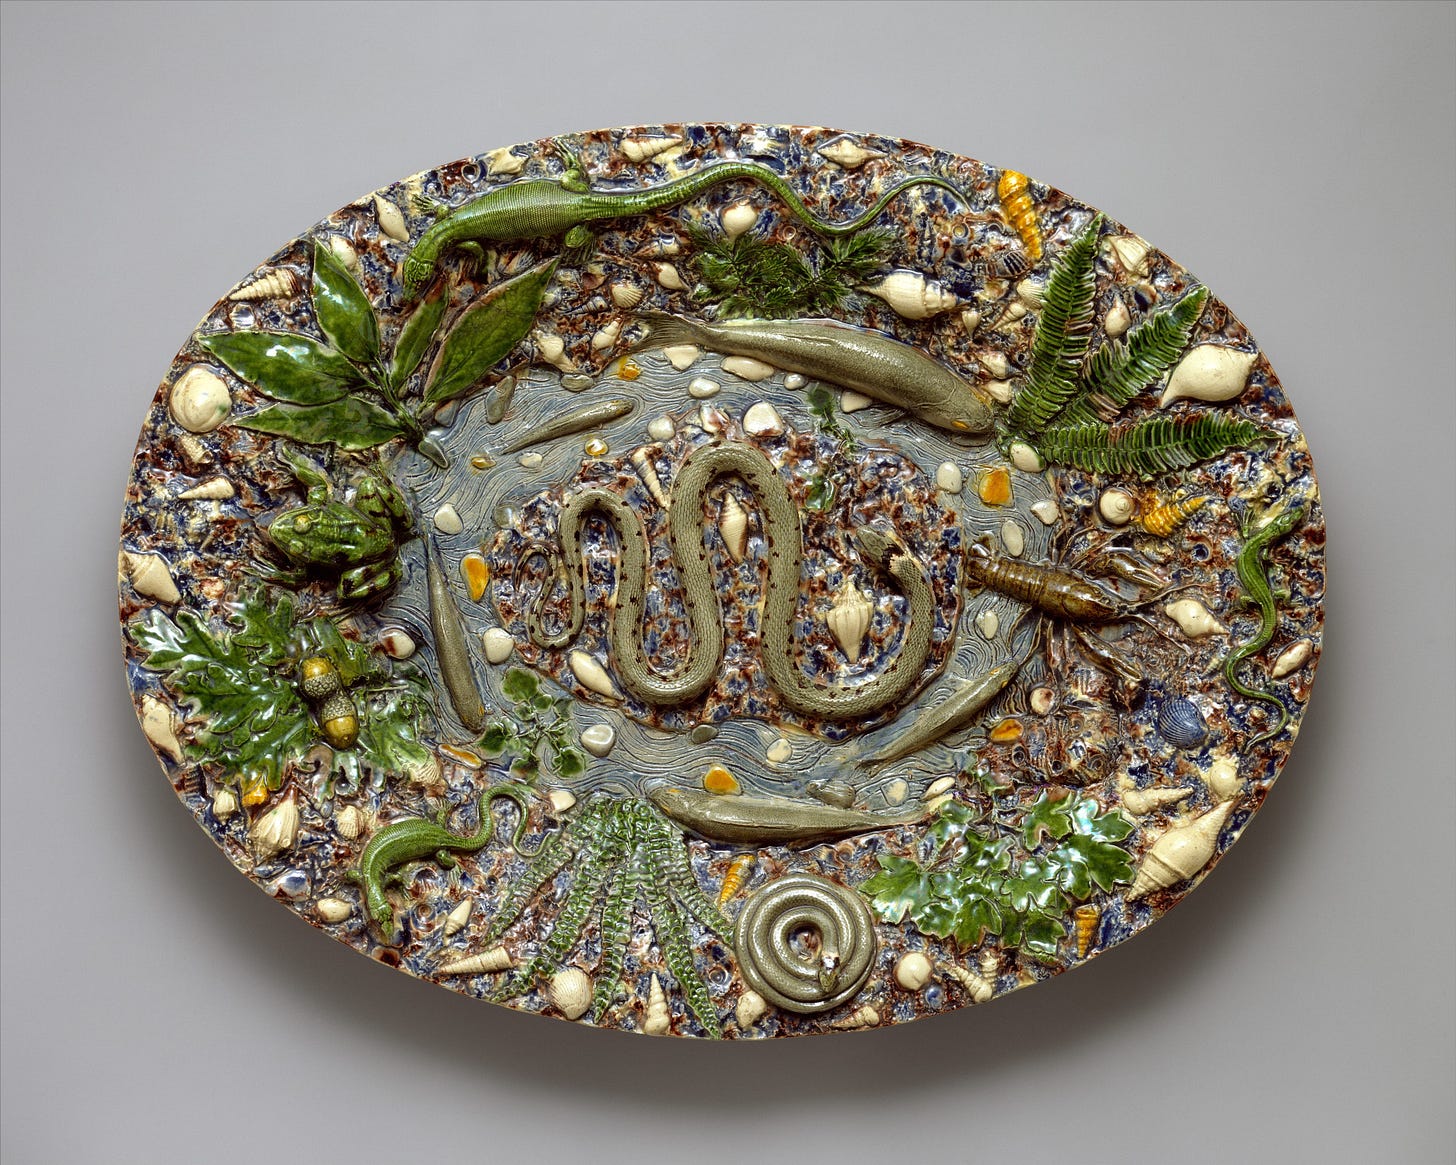 Ceramic platter with 3d natural elements like worms, plants and other bugs.